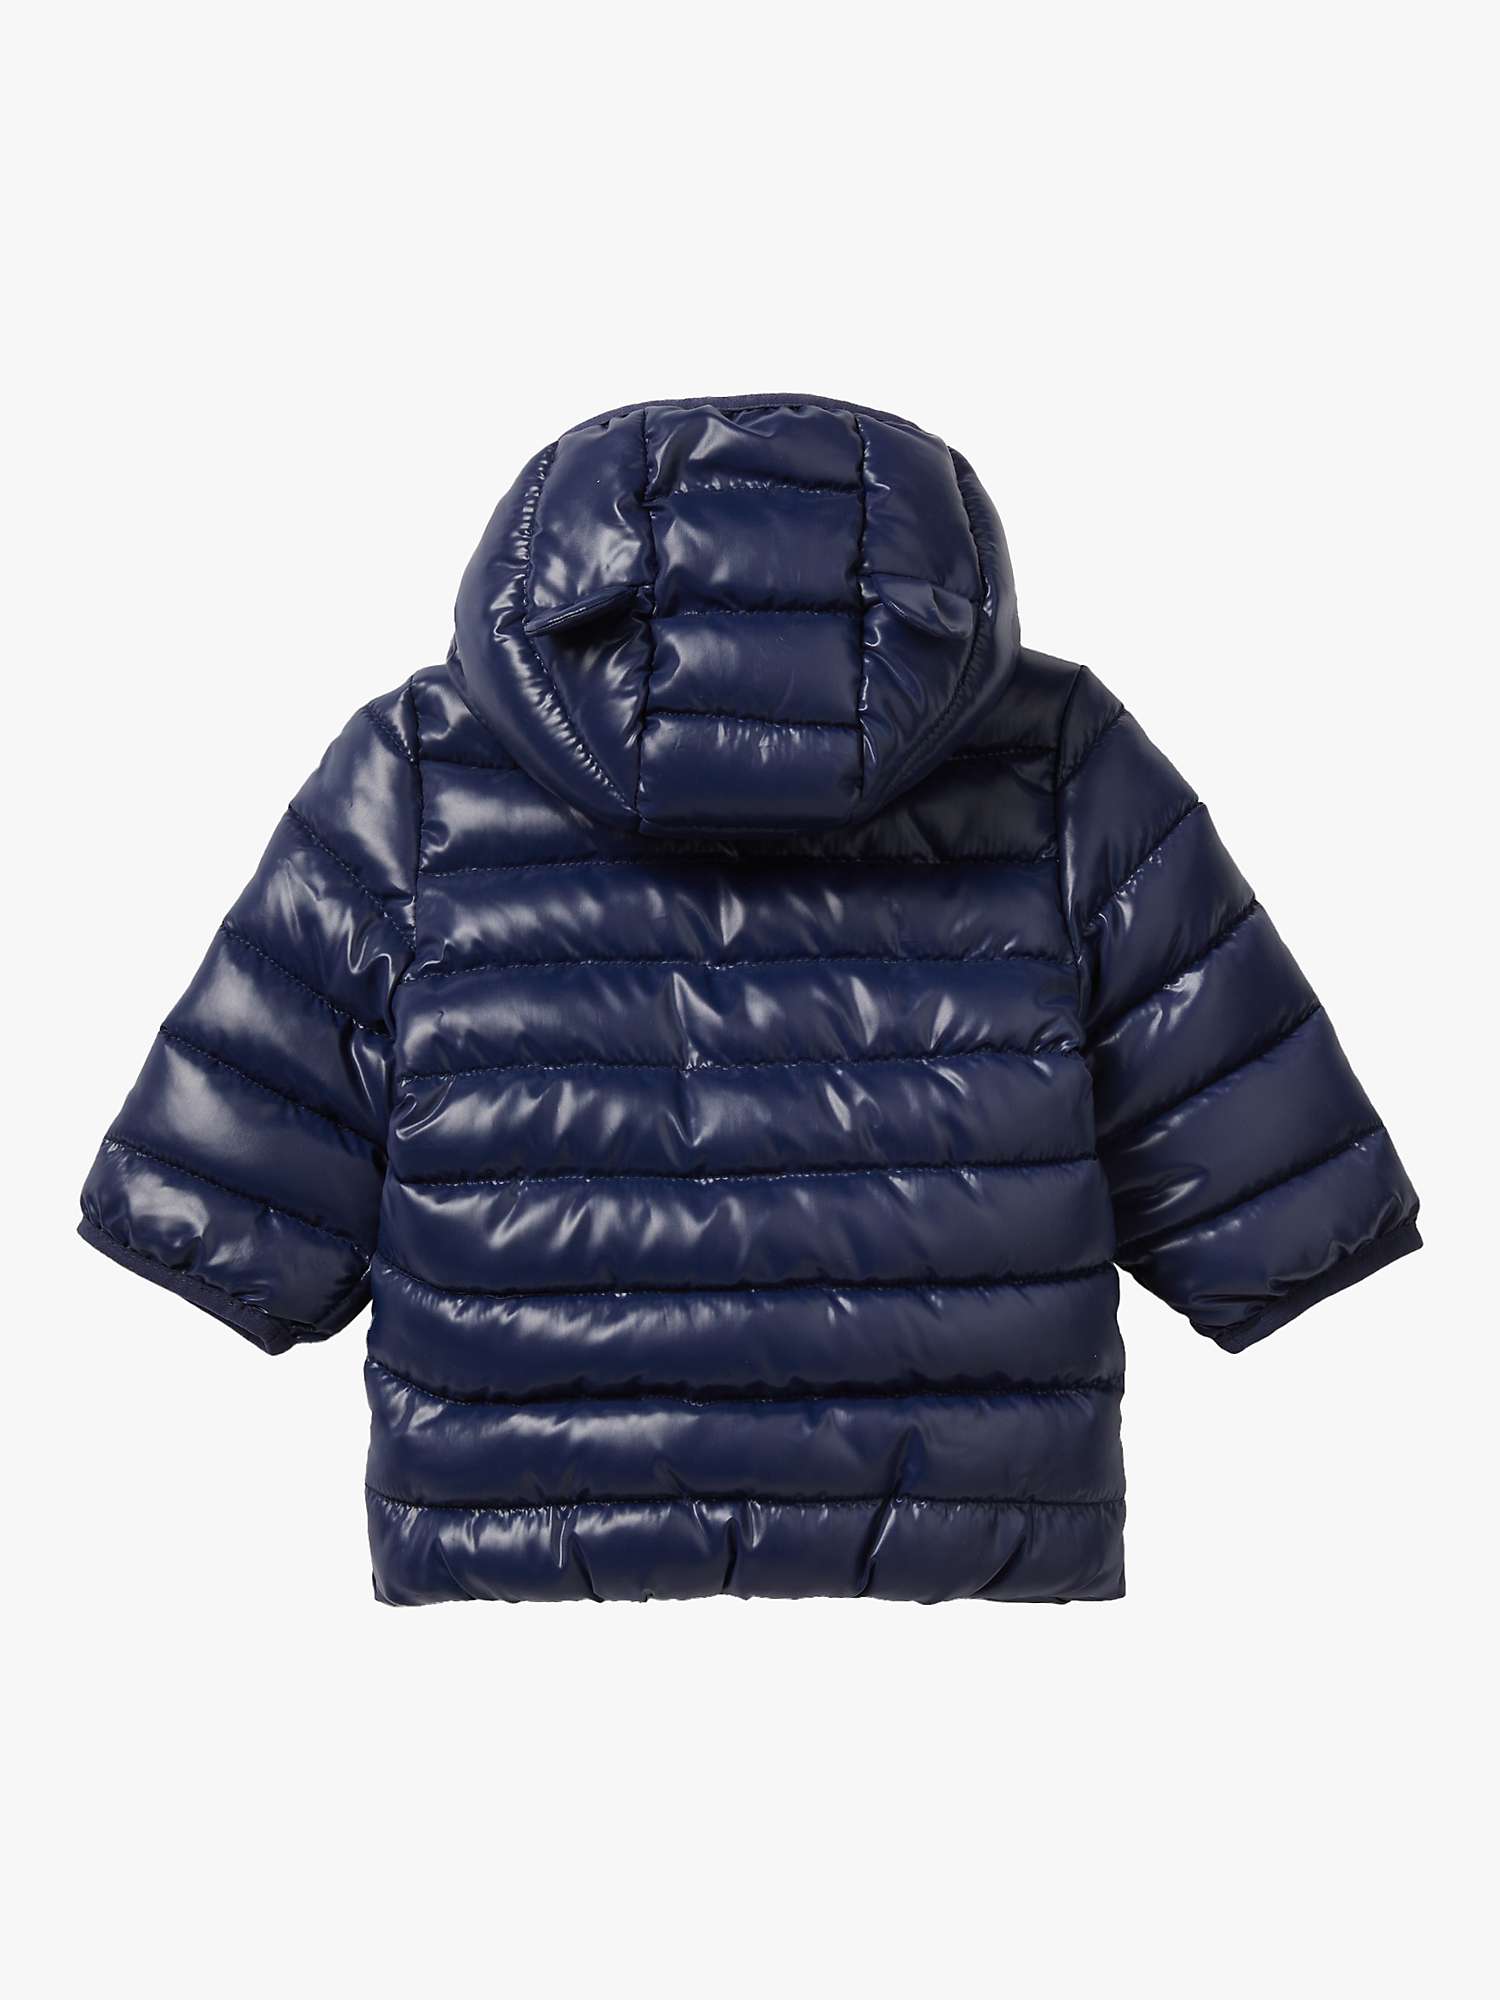 Buy Benetton Baby Hooded Padded Jacket Online at johnlewis.com